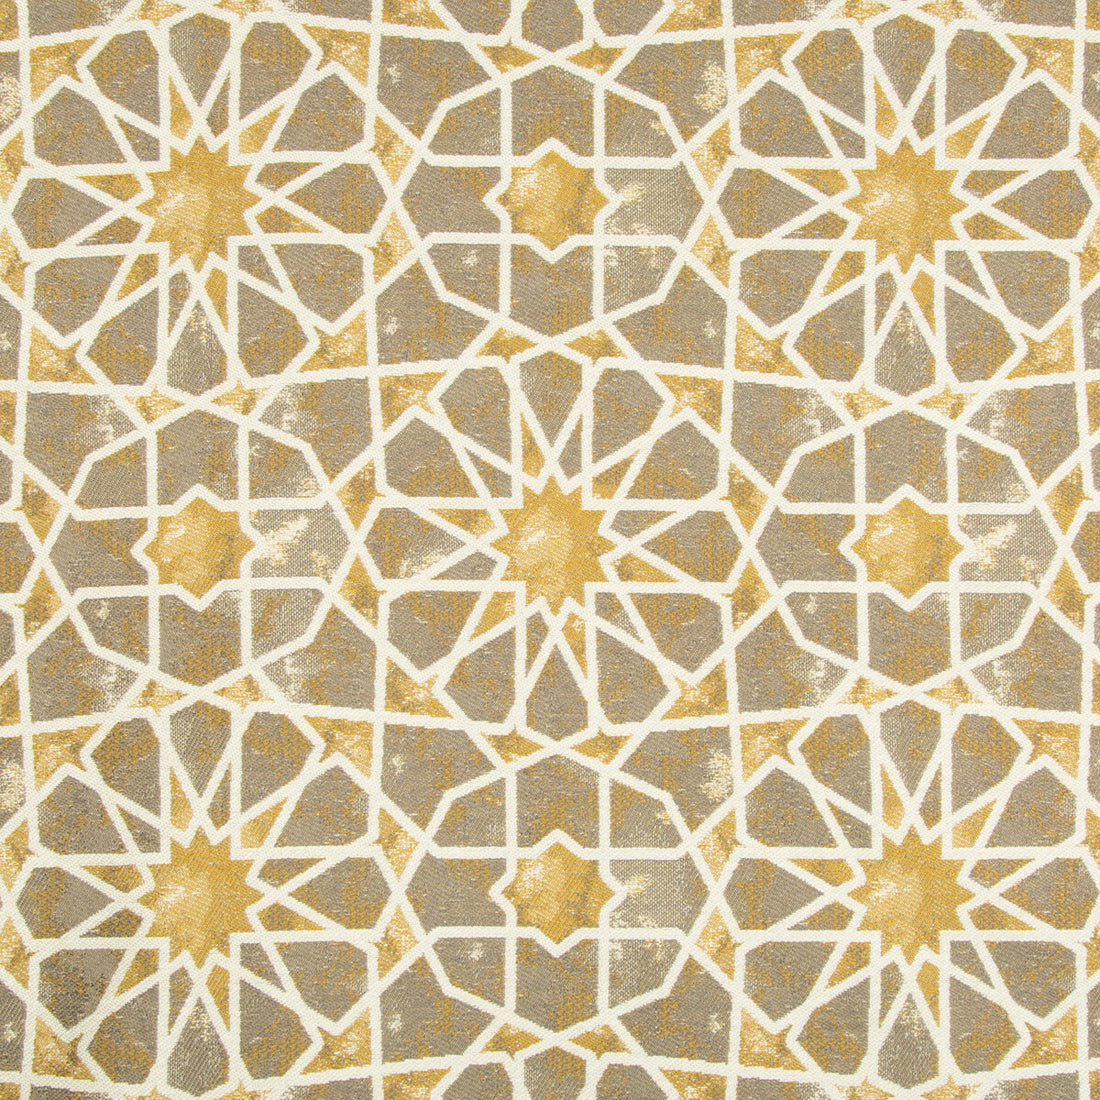 Kravet Contract fabric in 34763-64 color - pattern 34763.64.0 - by Kravet Contract in the Gis collection